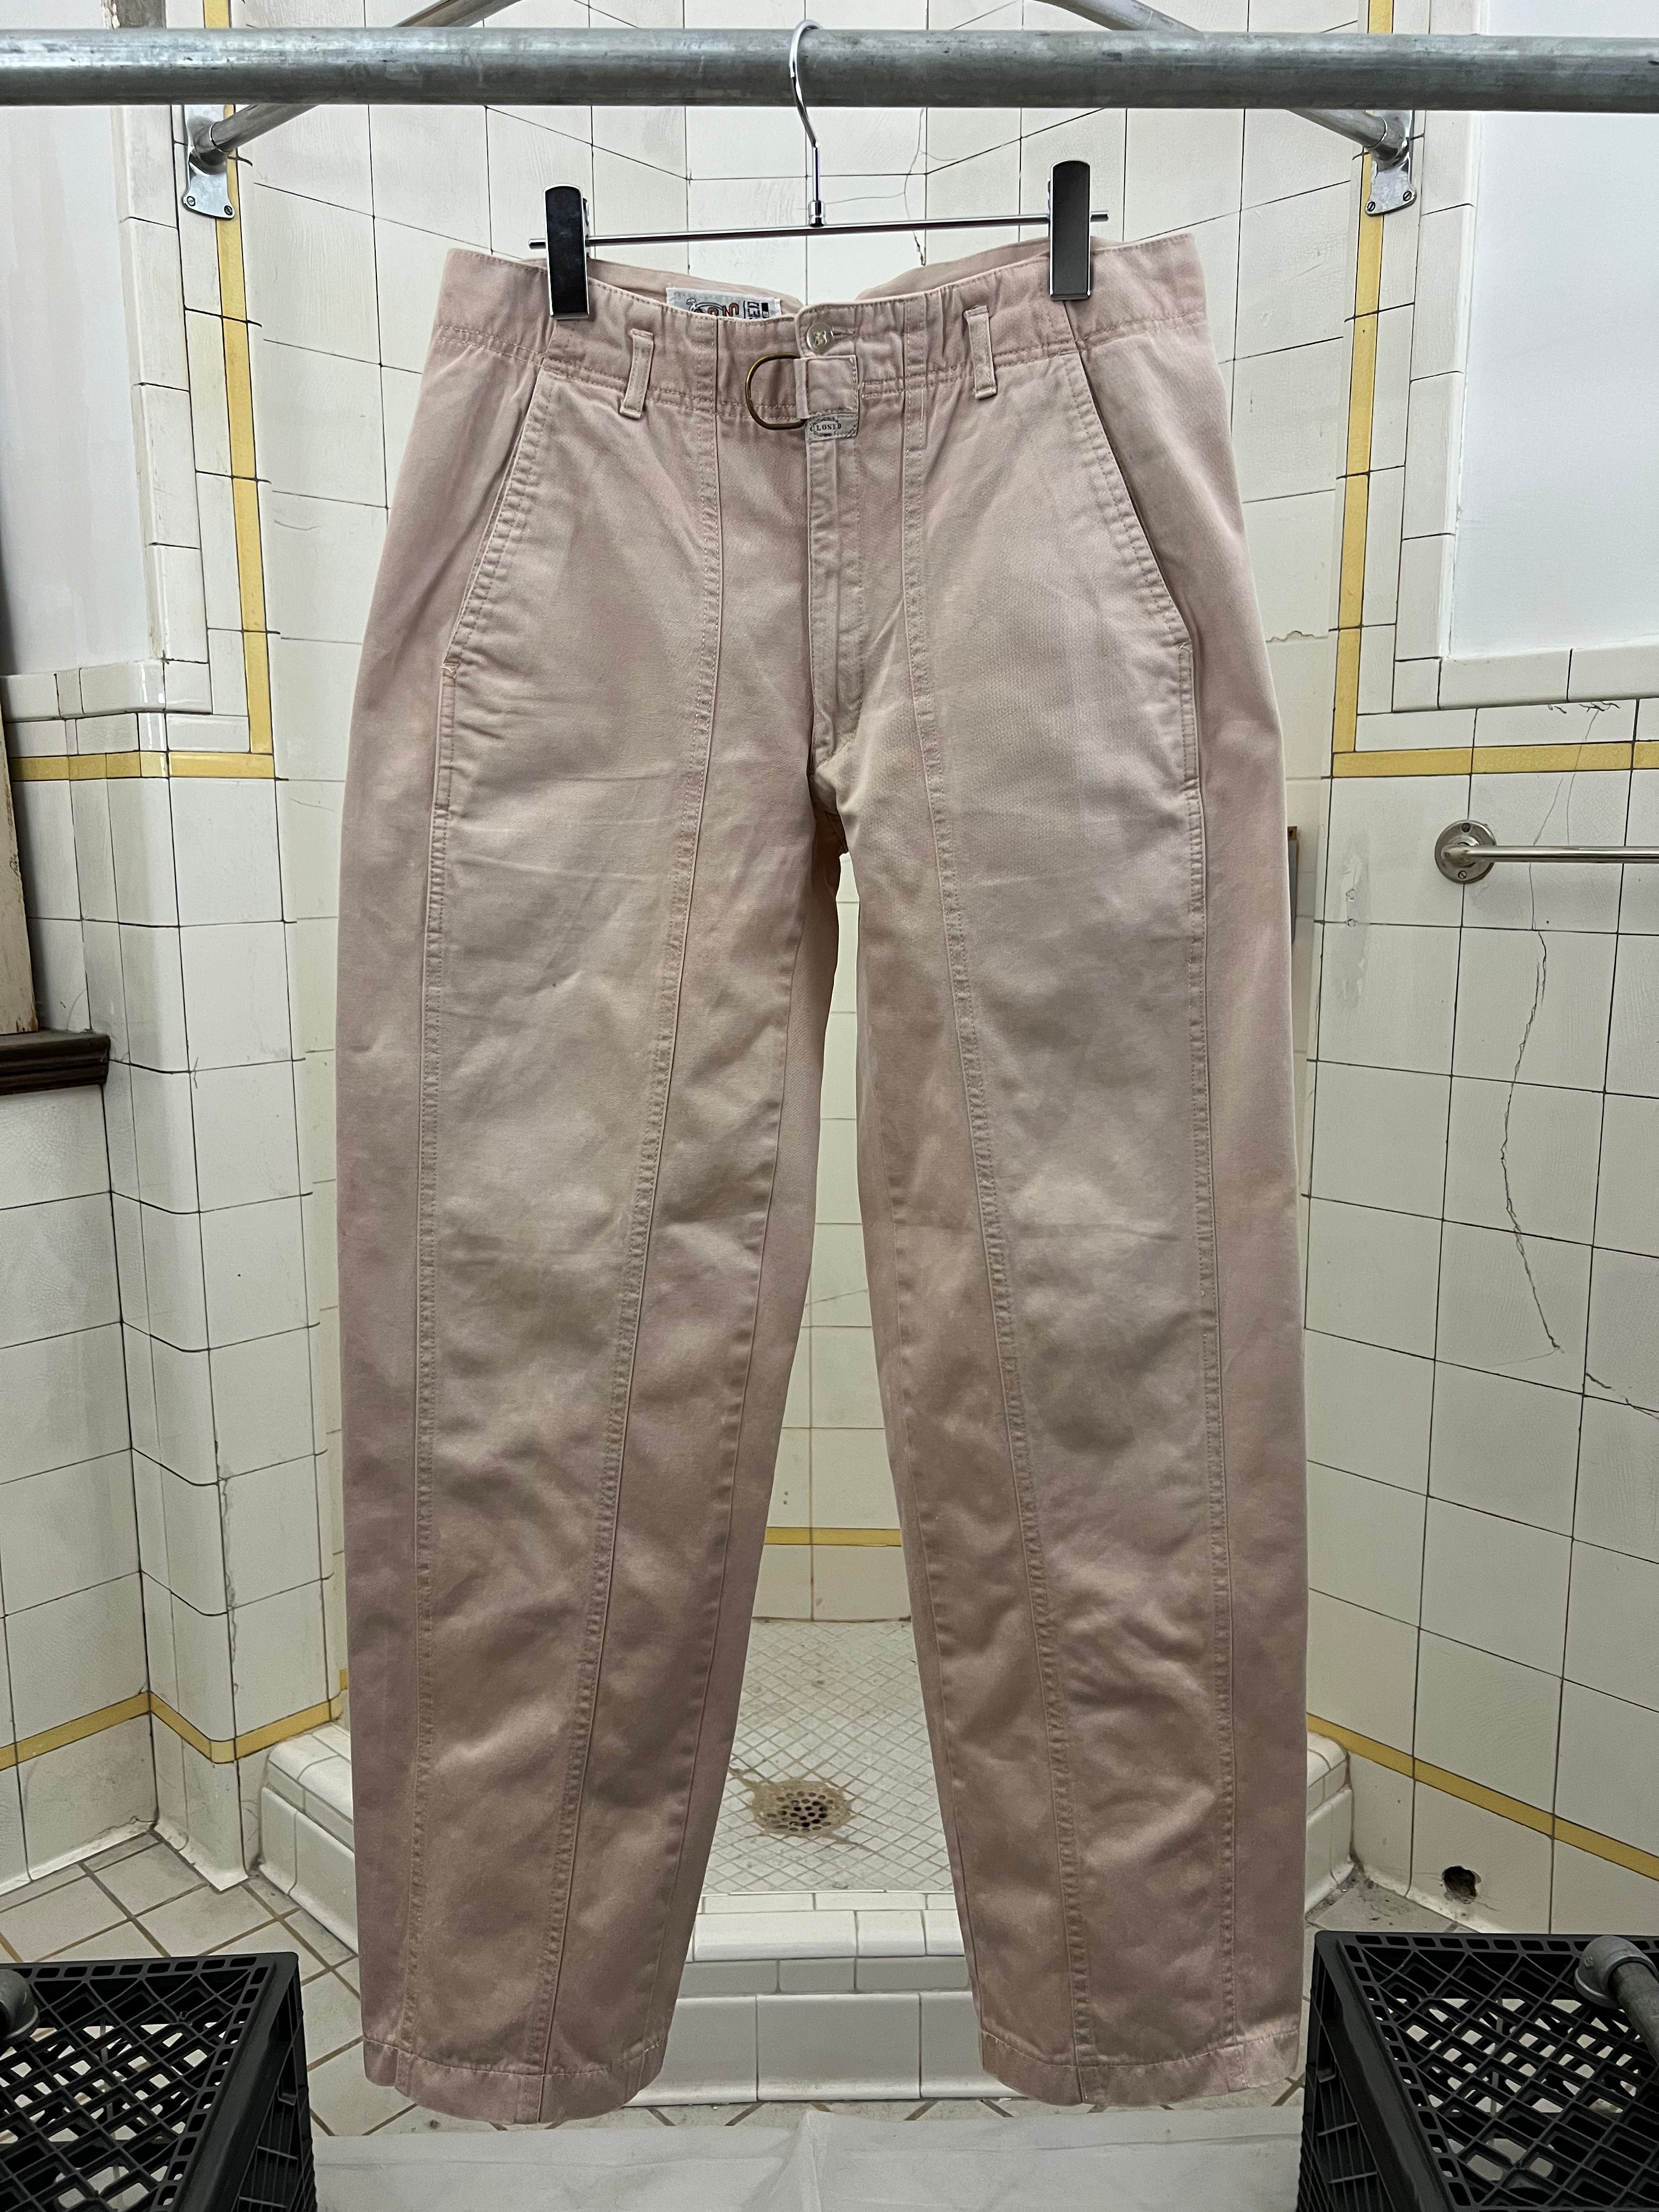 1980s Marithe Francois Girbaud x Closed Paneled Trousers - Size M